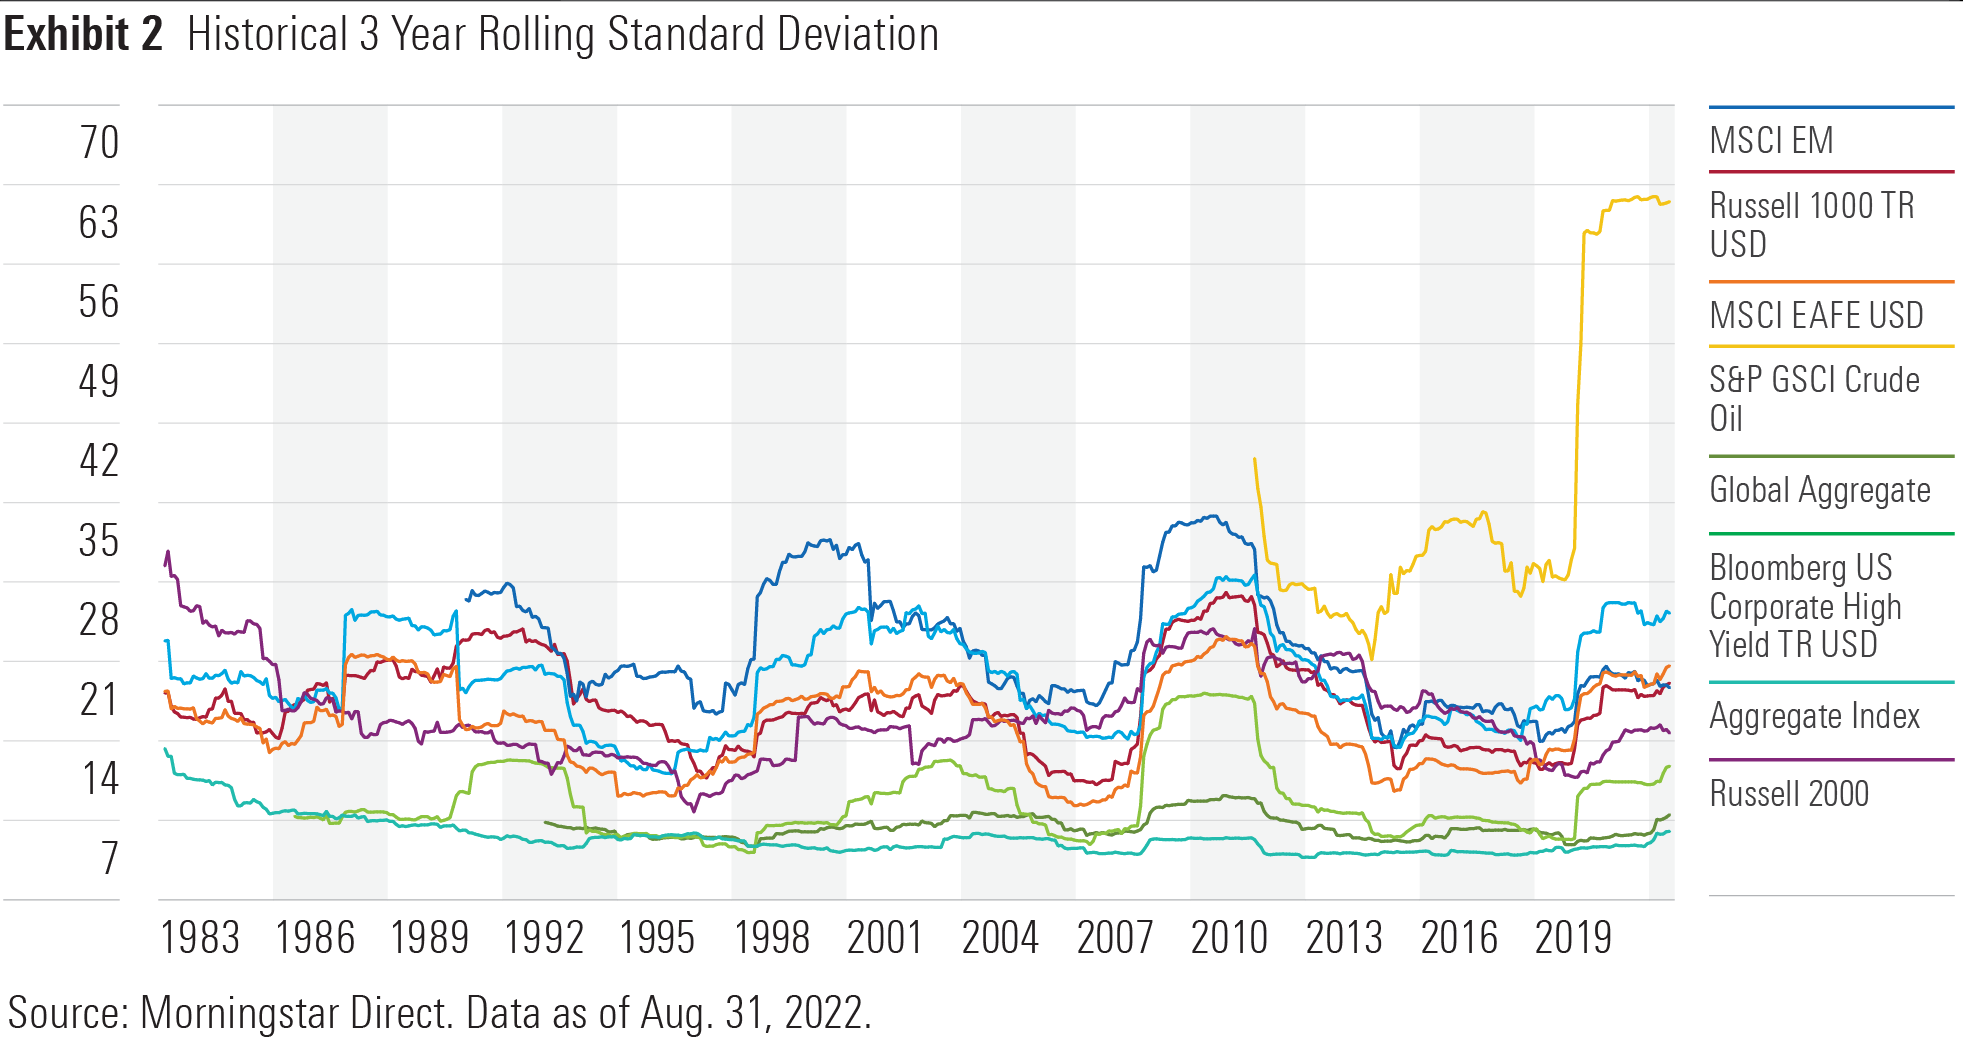 Historical 3-Year Rolling Standard Deviation